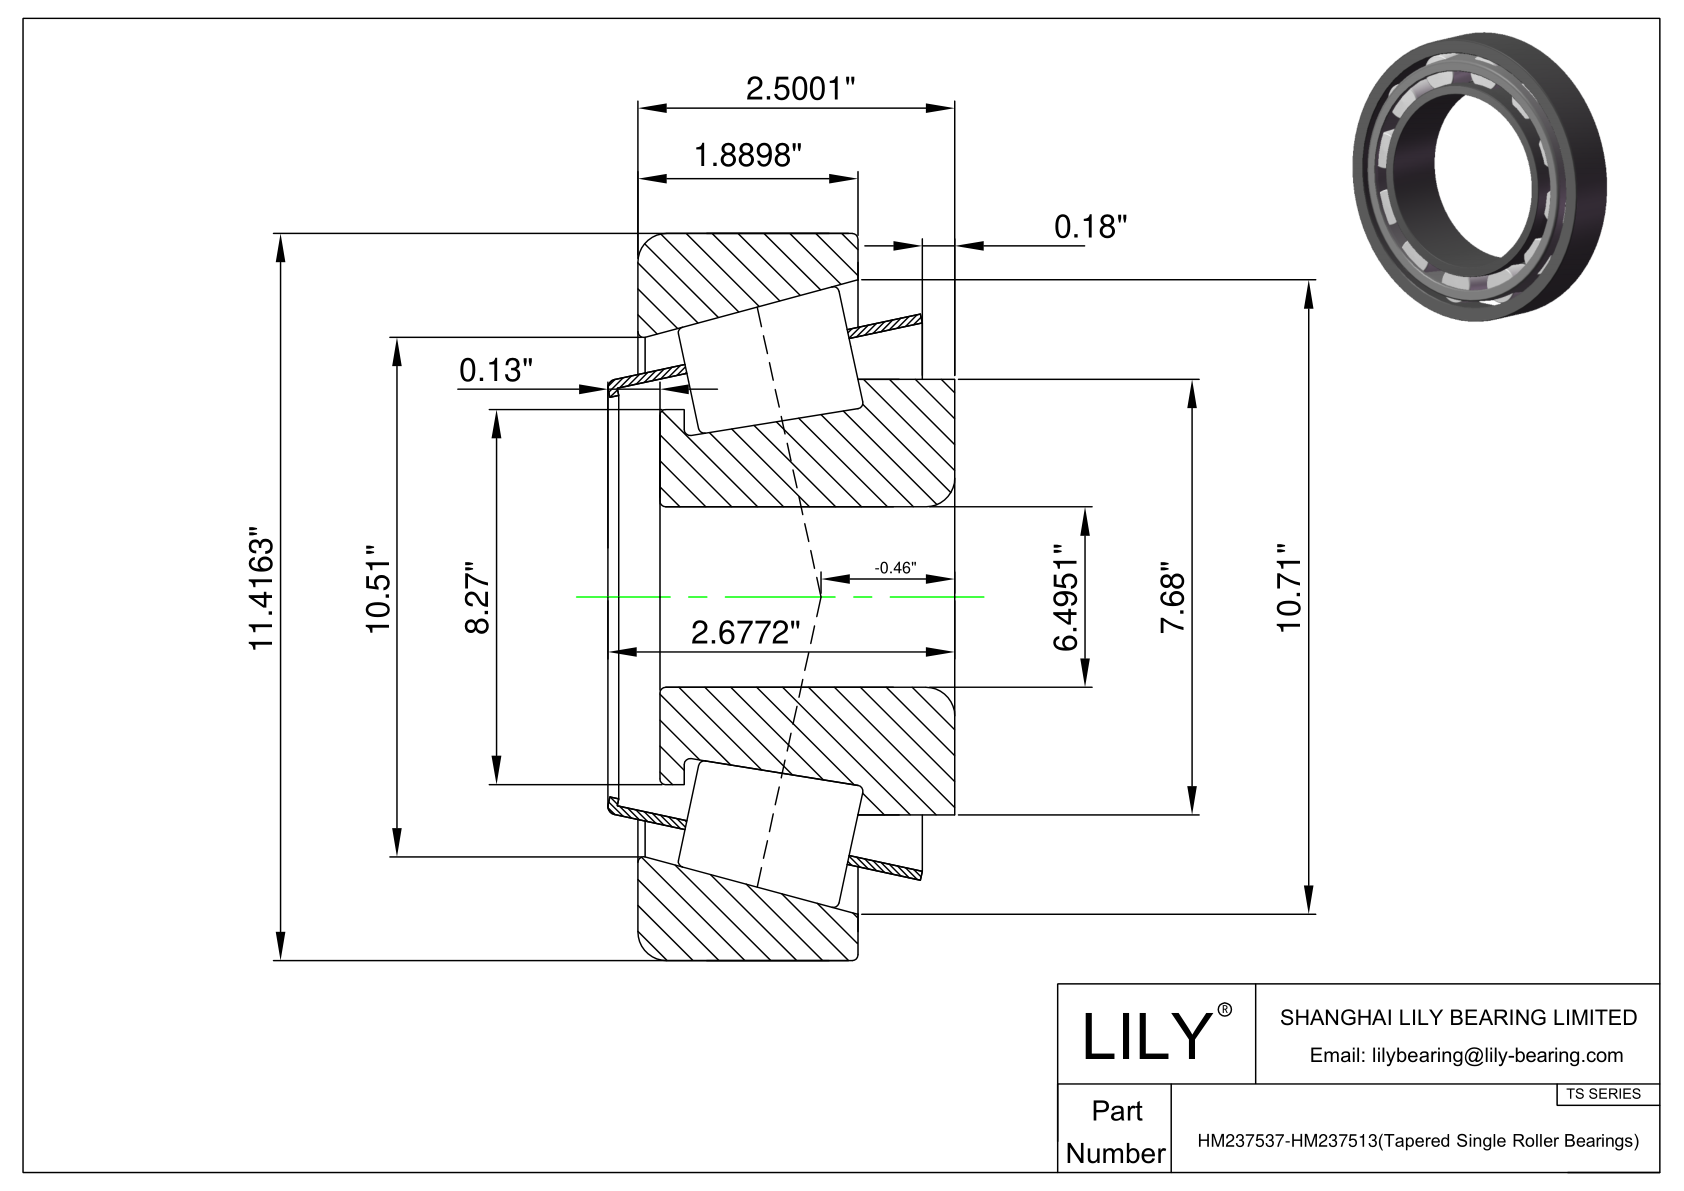 HM237537-HM237513 TS (Tapered Single Roller Bearings) (Imperial) cad drawing